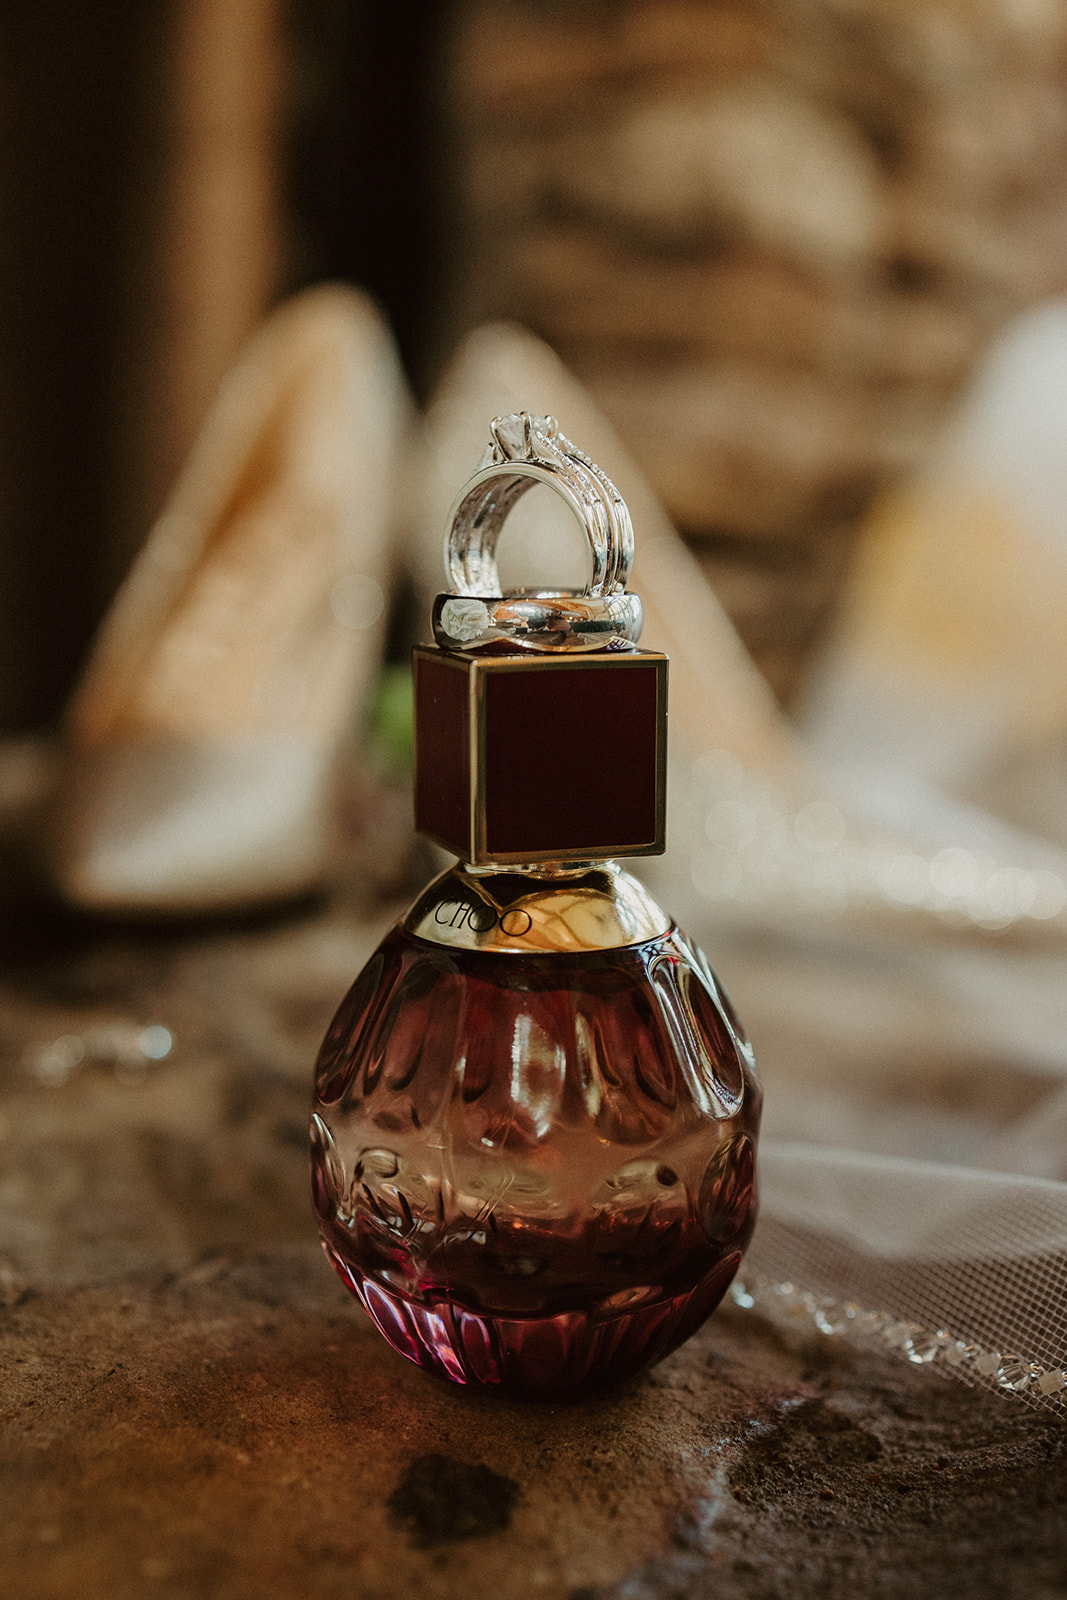 the bottle of perfume and wedding rings